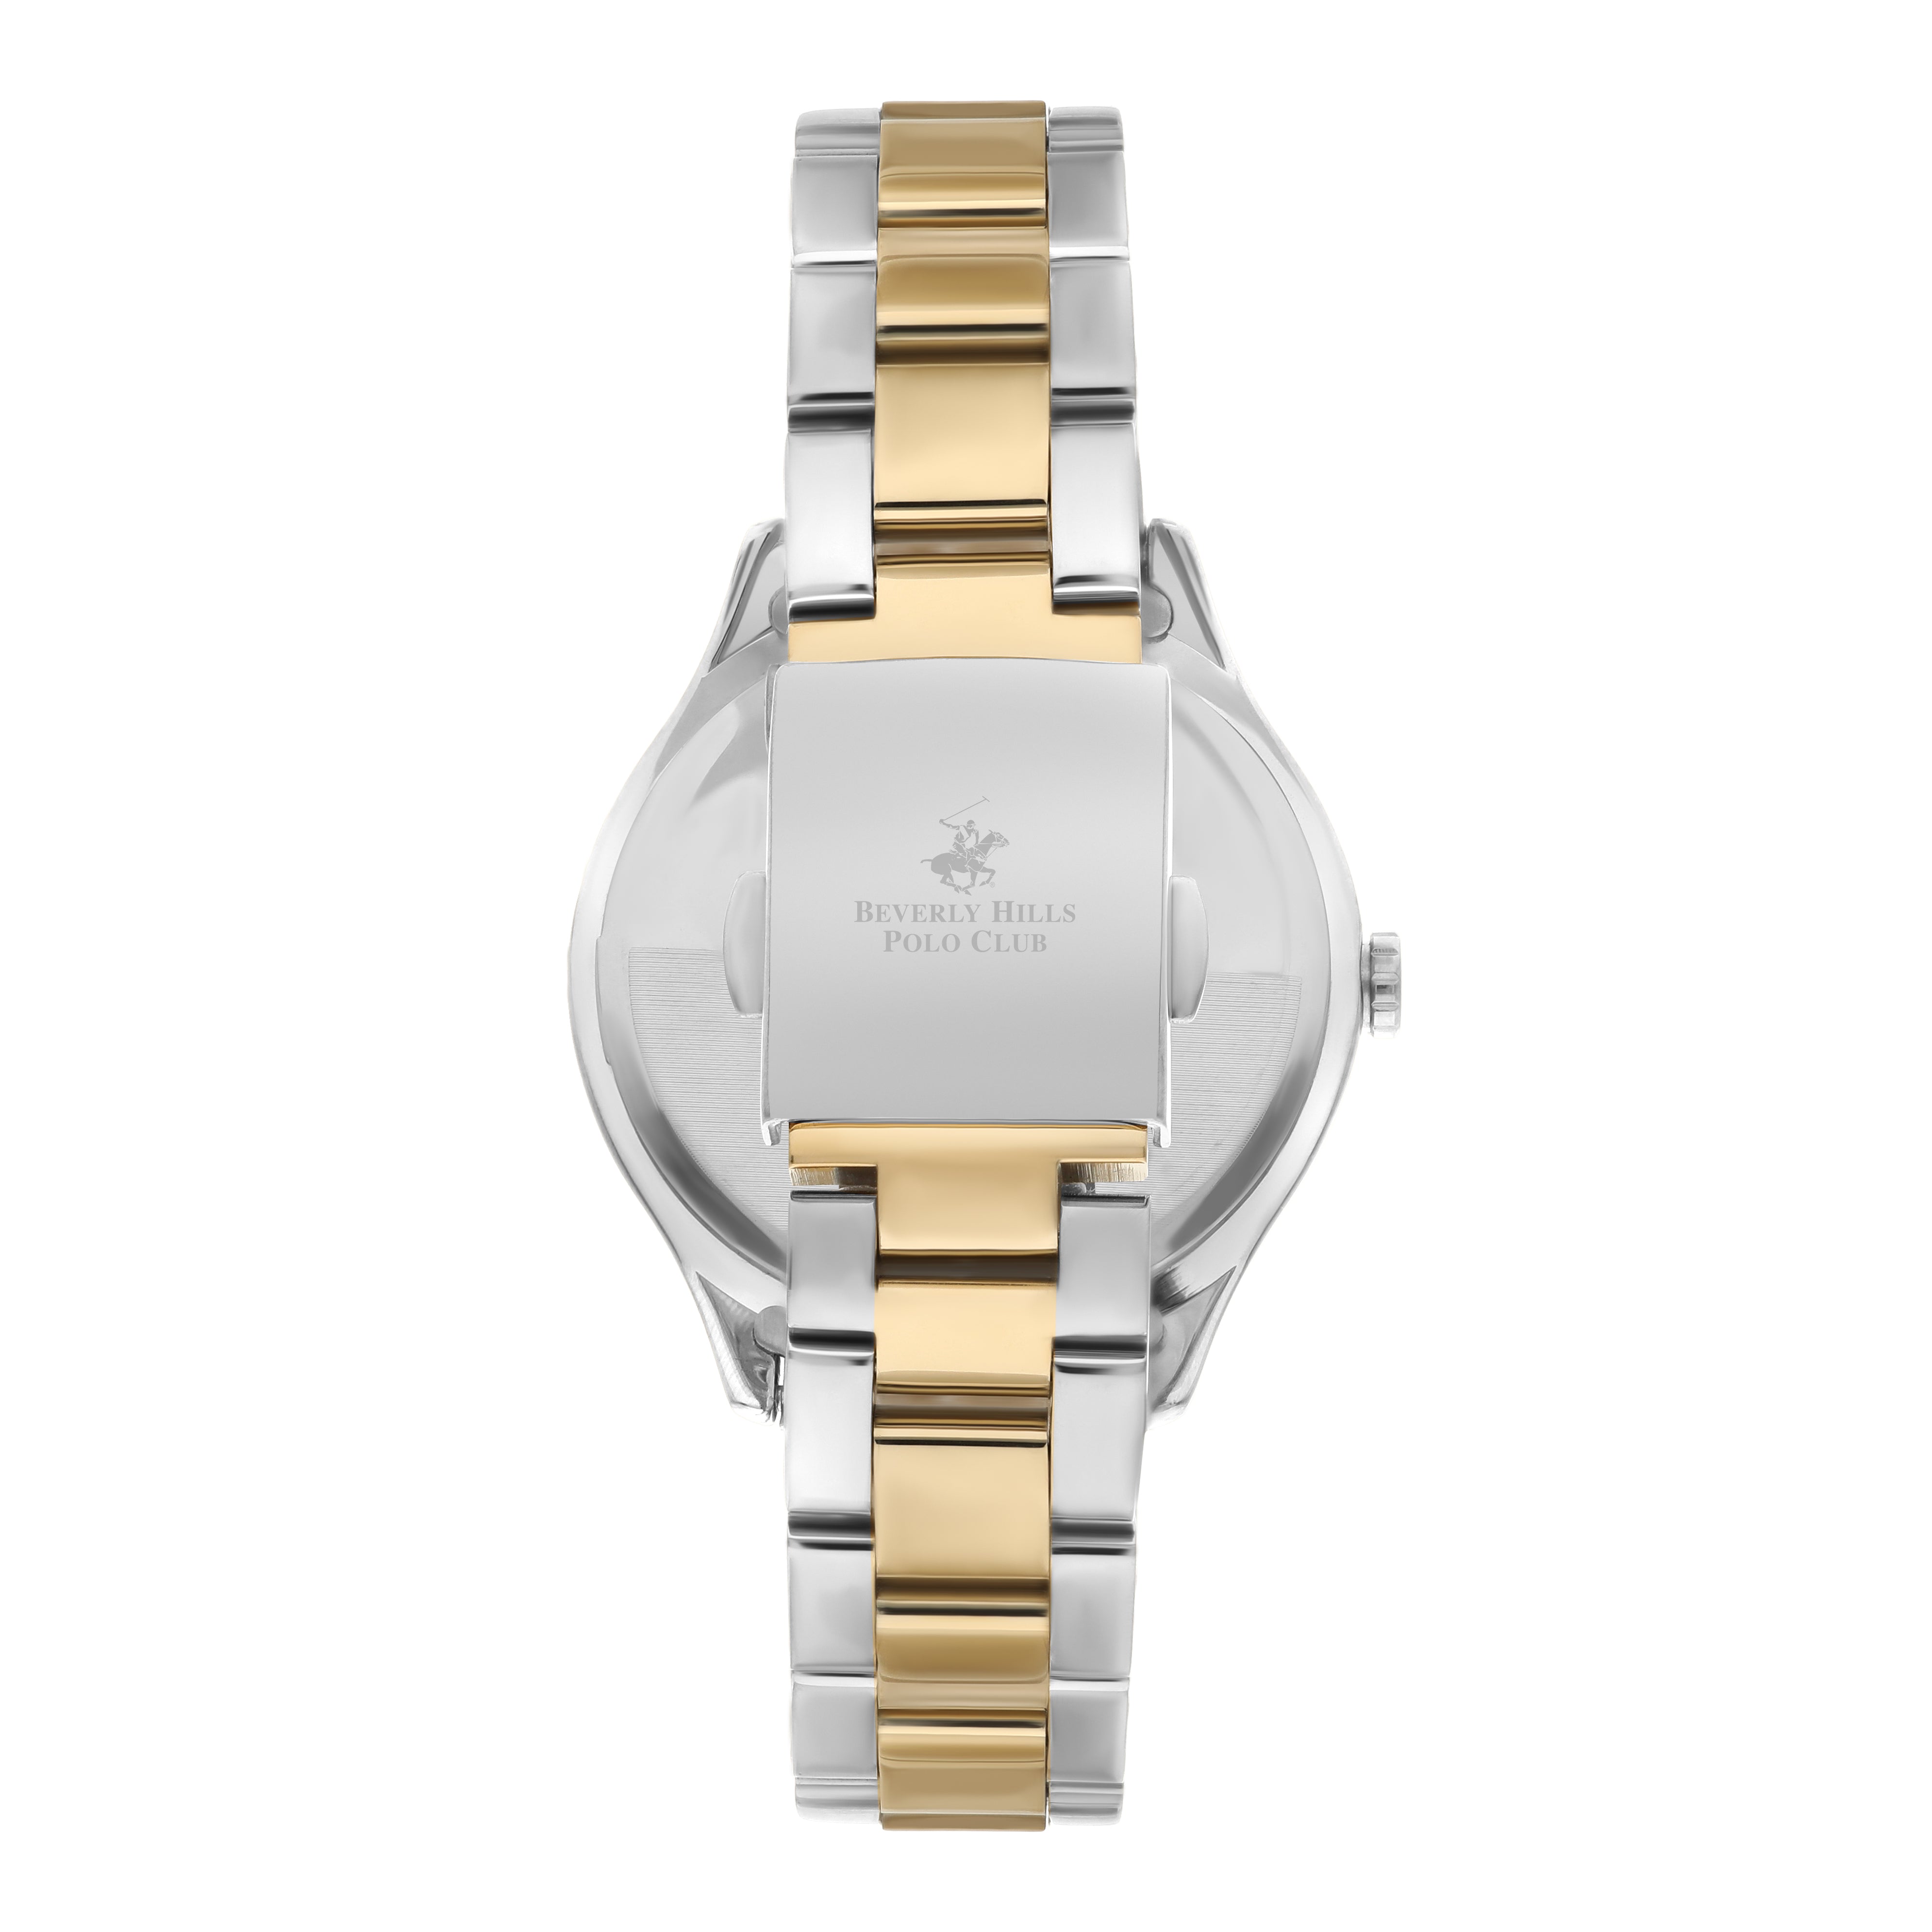 Polo - BP3291C.220 - Ladies Stainless Steel Watch